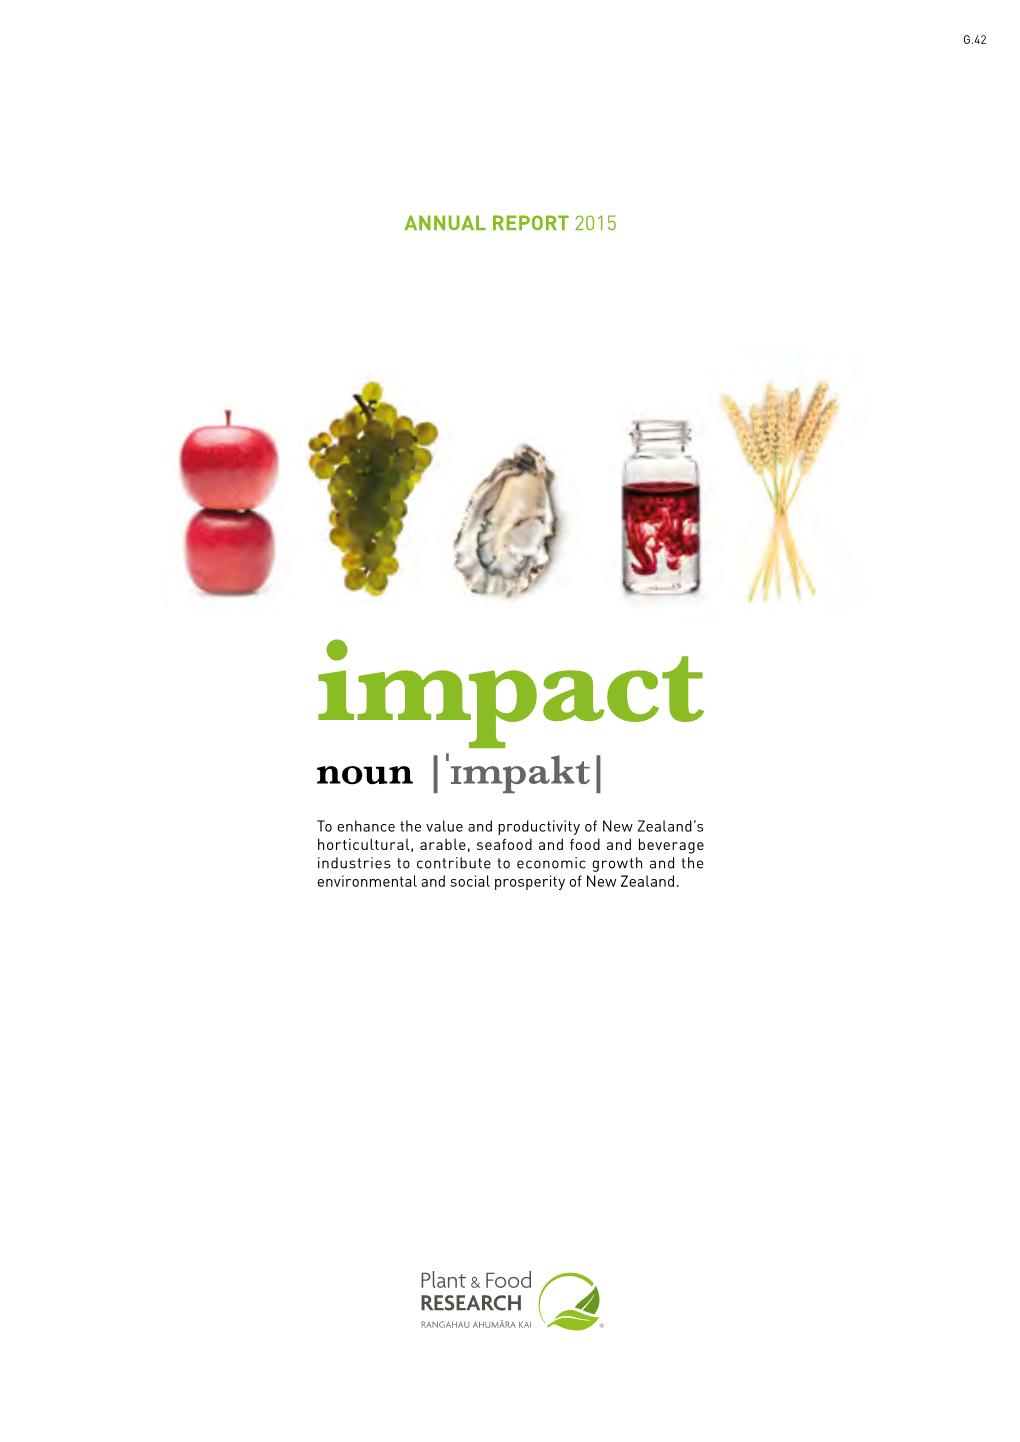 Plant & Food Research Annual Report 2015